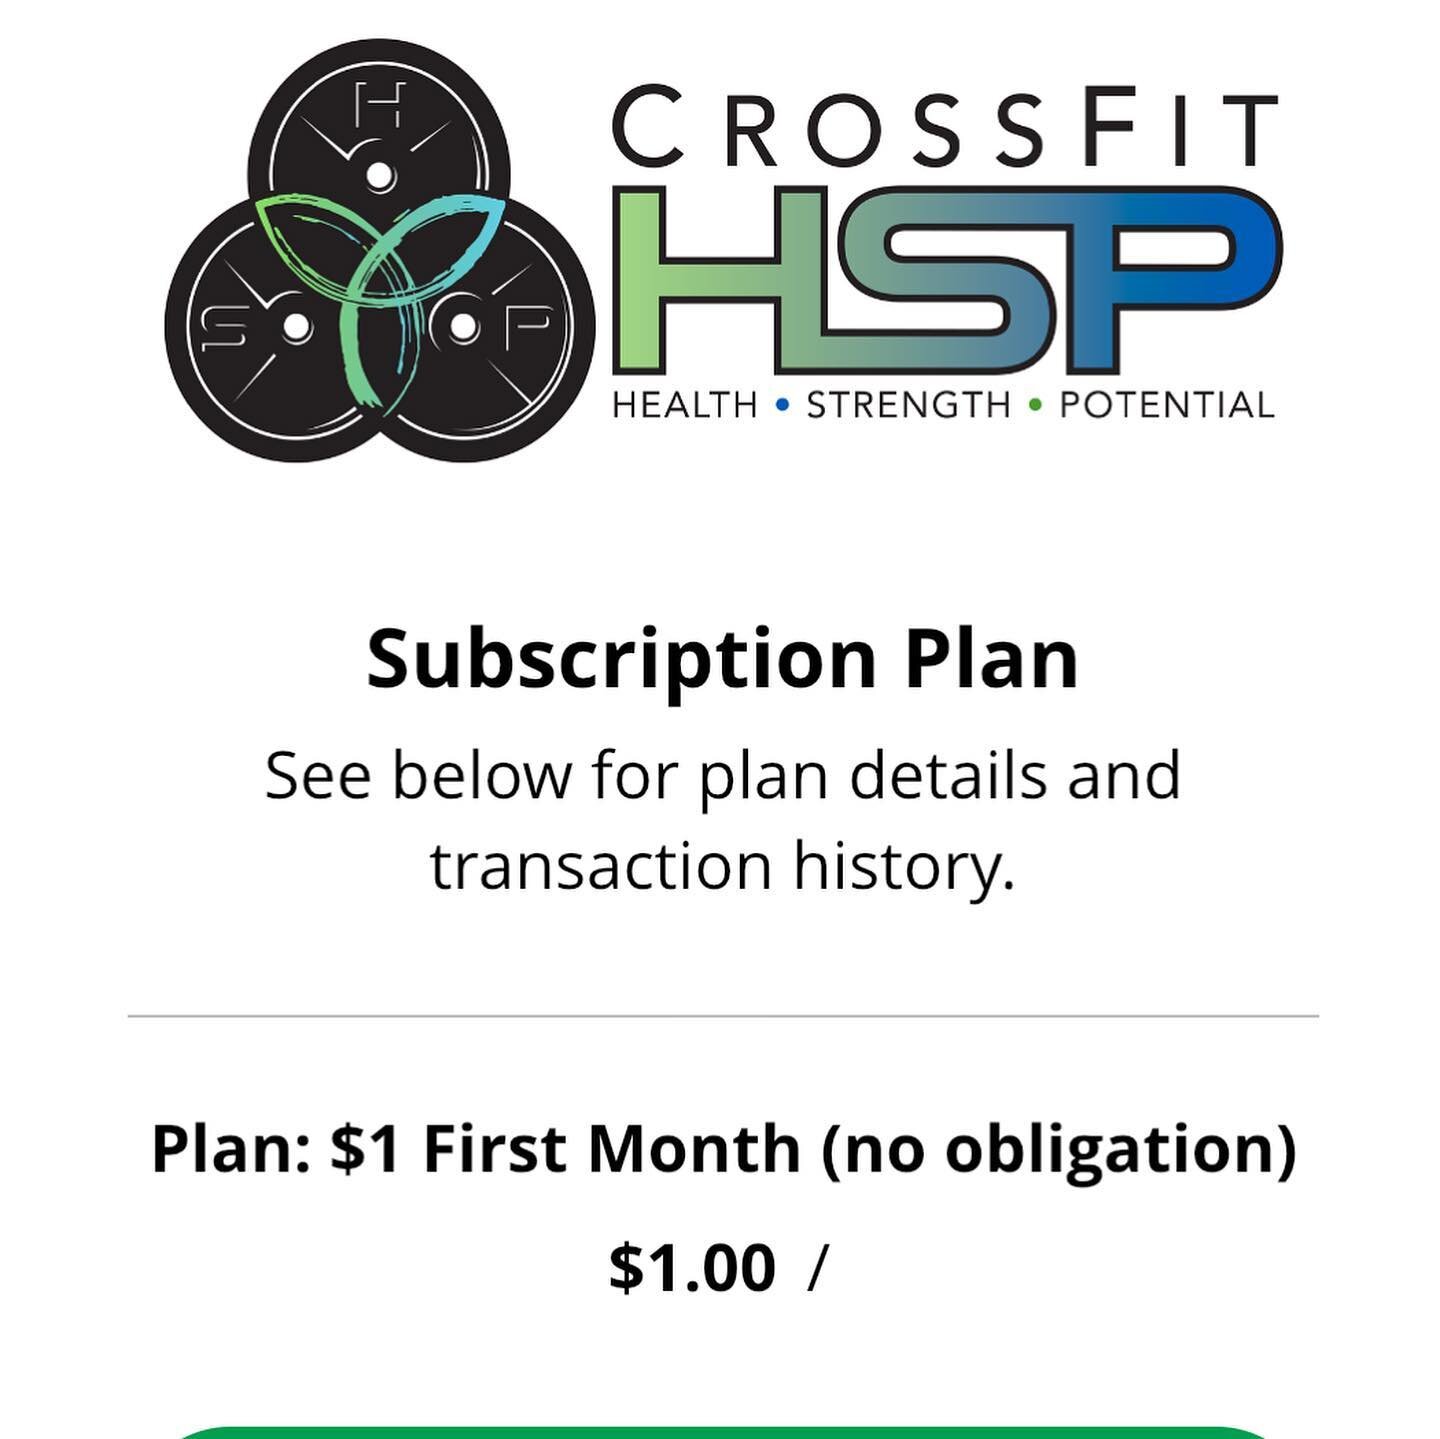 Happy Thursday!!!

With summer winding down, kids getting ready to go back to school and everyone getting back to a regular schedule.

Why not give CrossFit HSP a try?!?! We have  several class times to choice from. Anywhere from 5am to 6:30pm 

The 